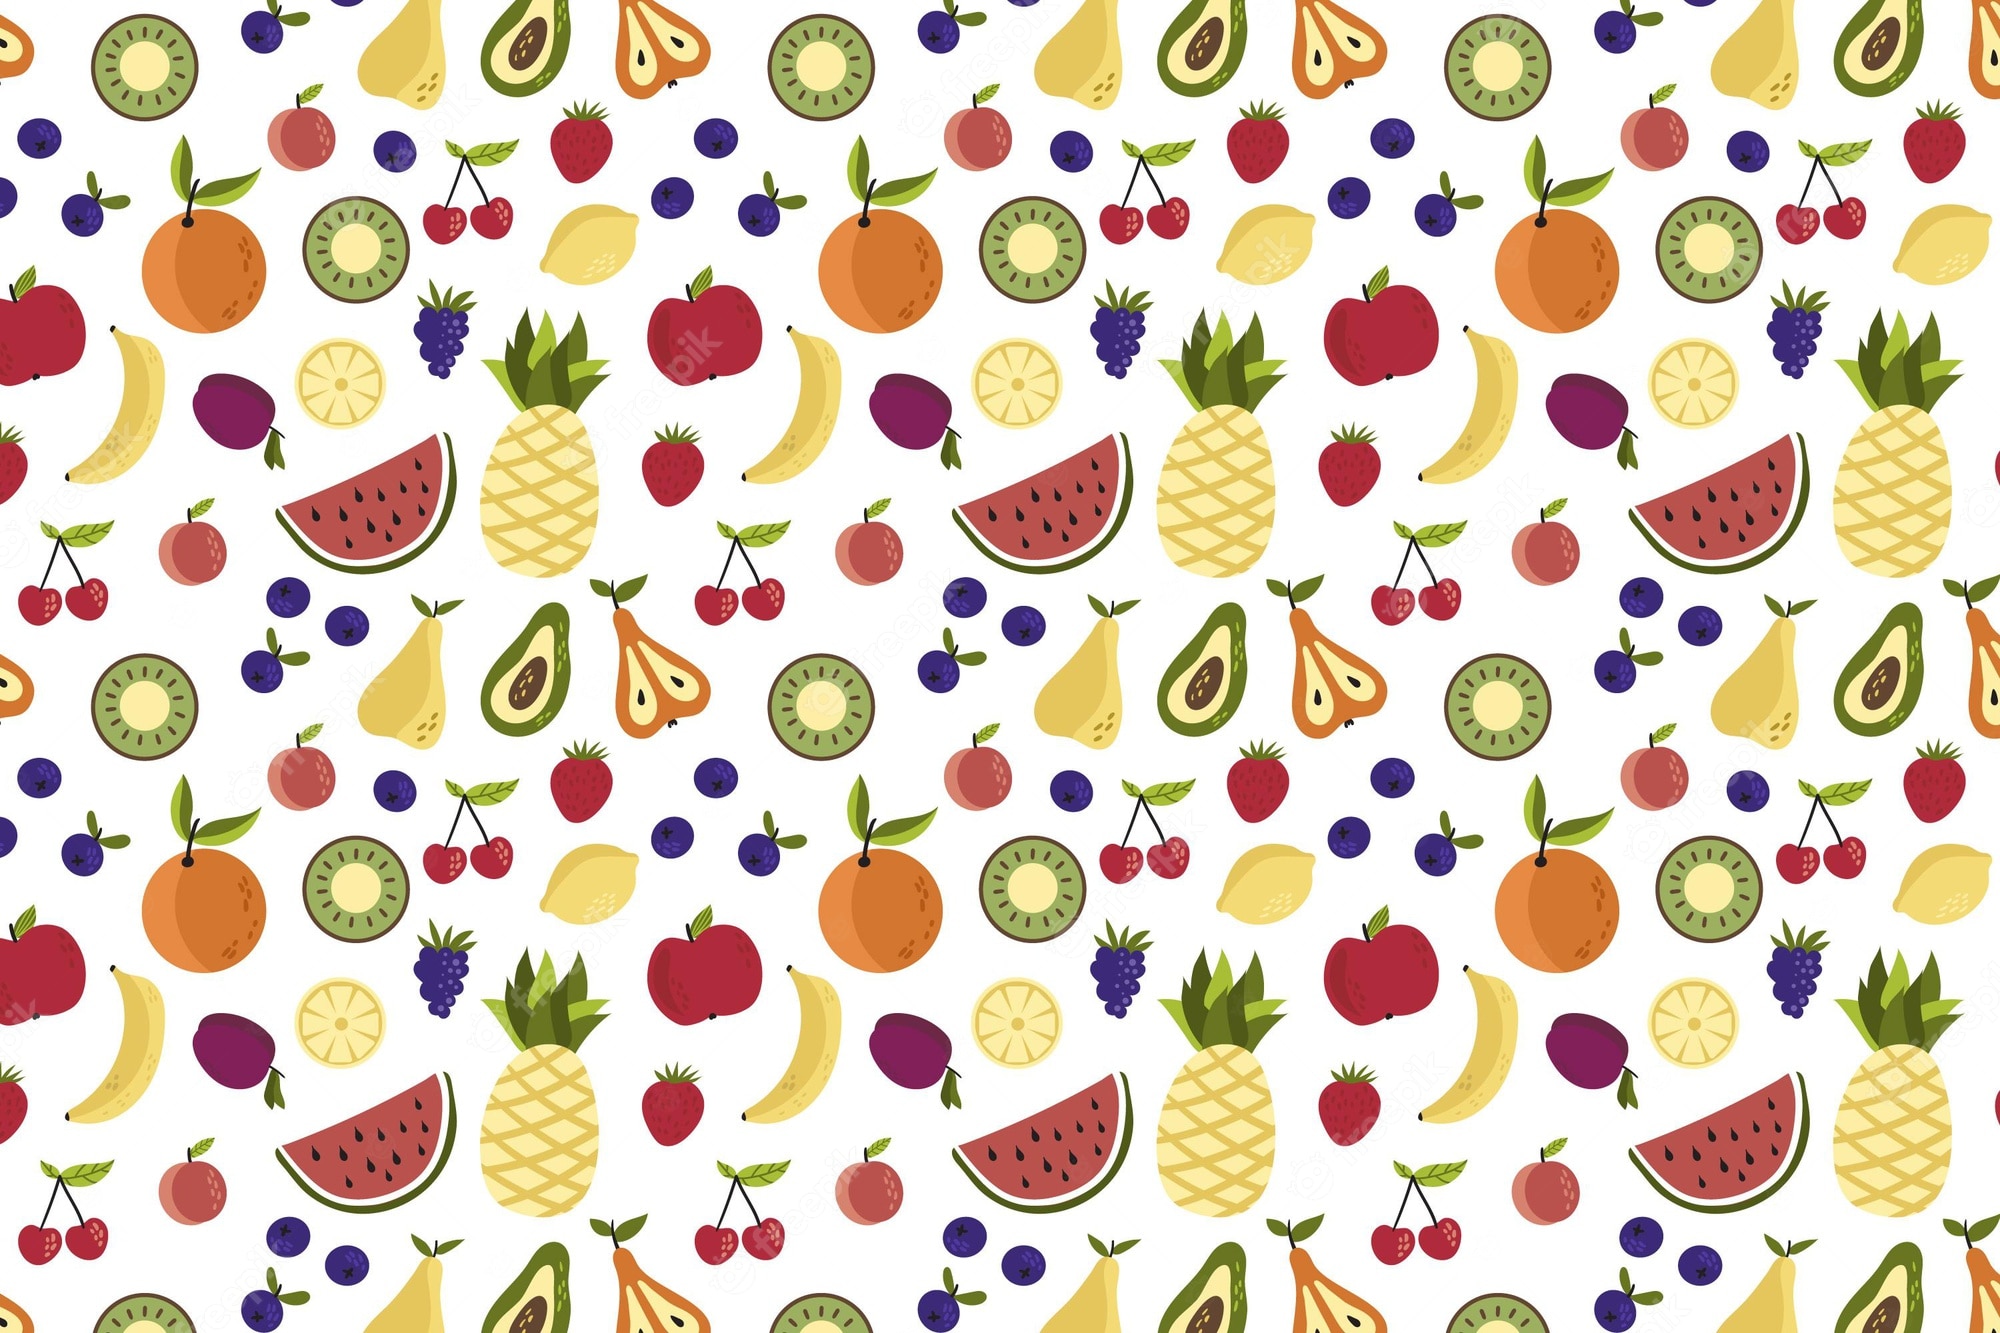 A pattern of fruit and vegetables on white background - Fruit